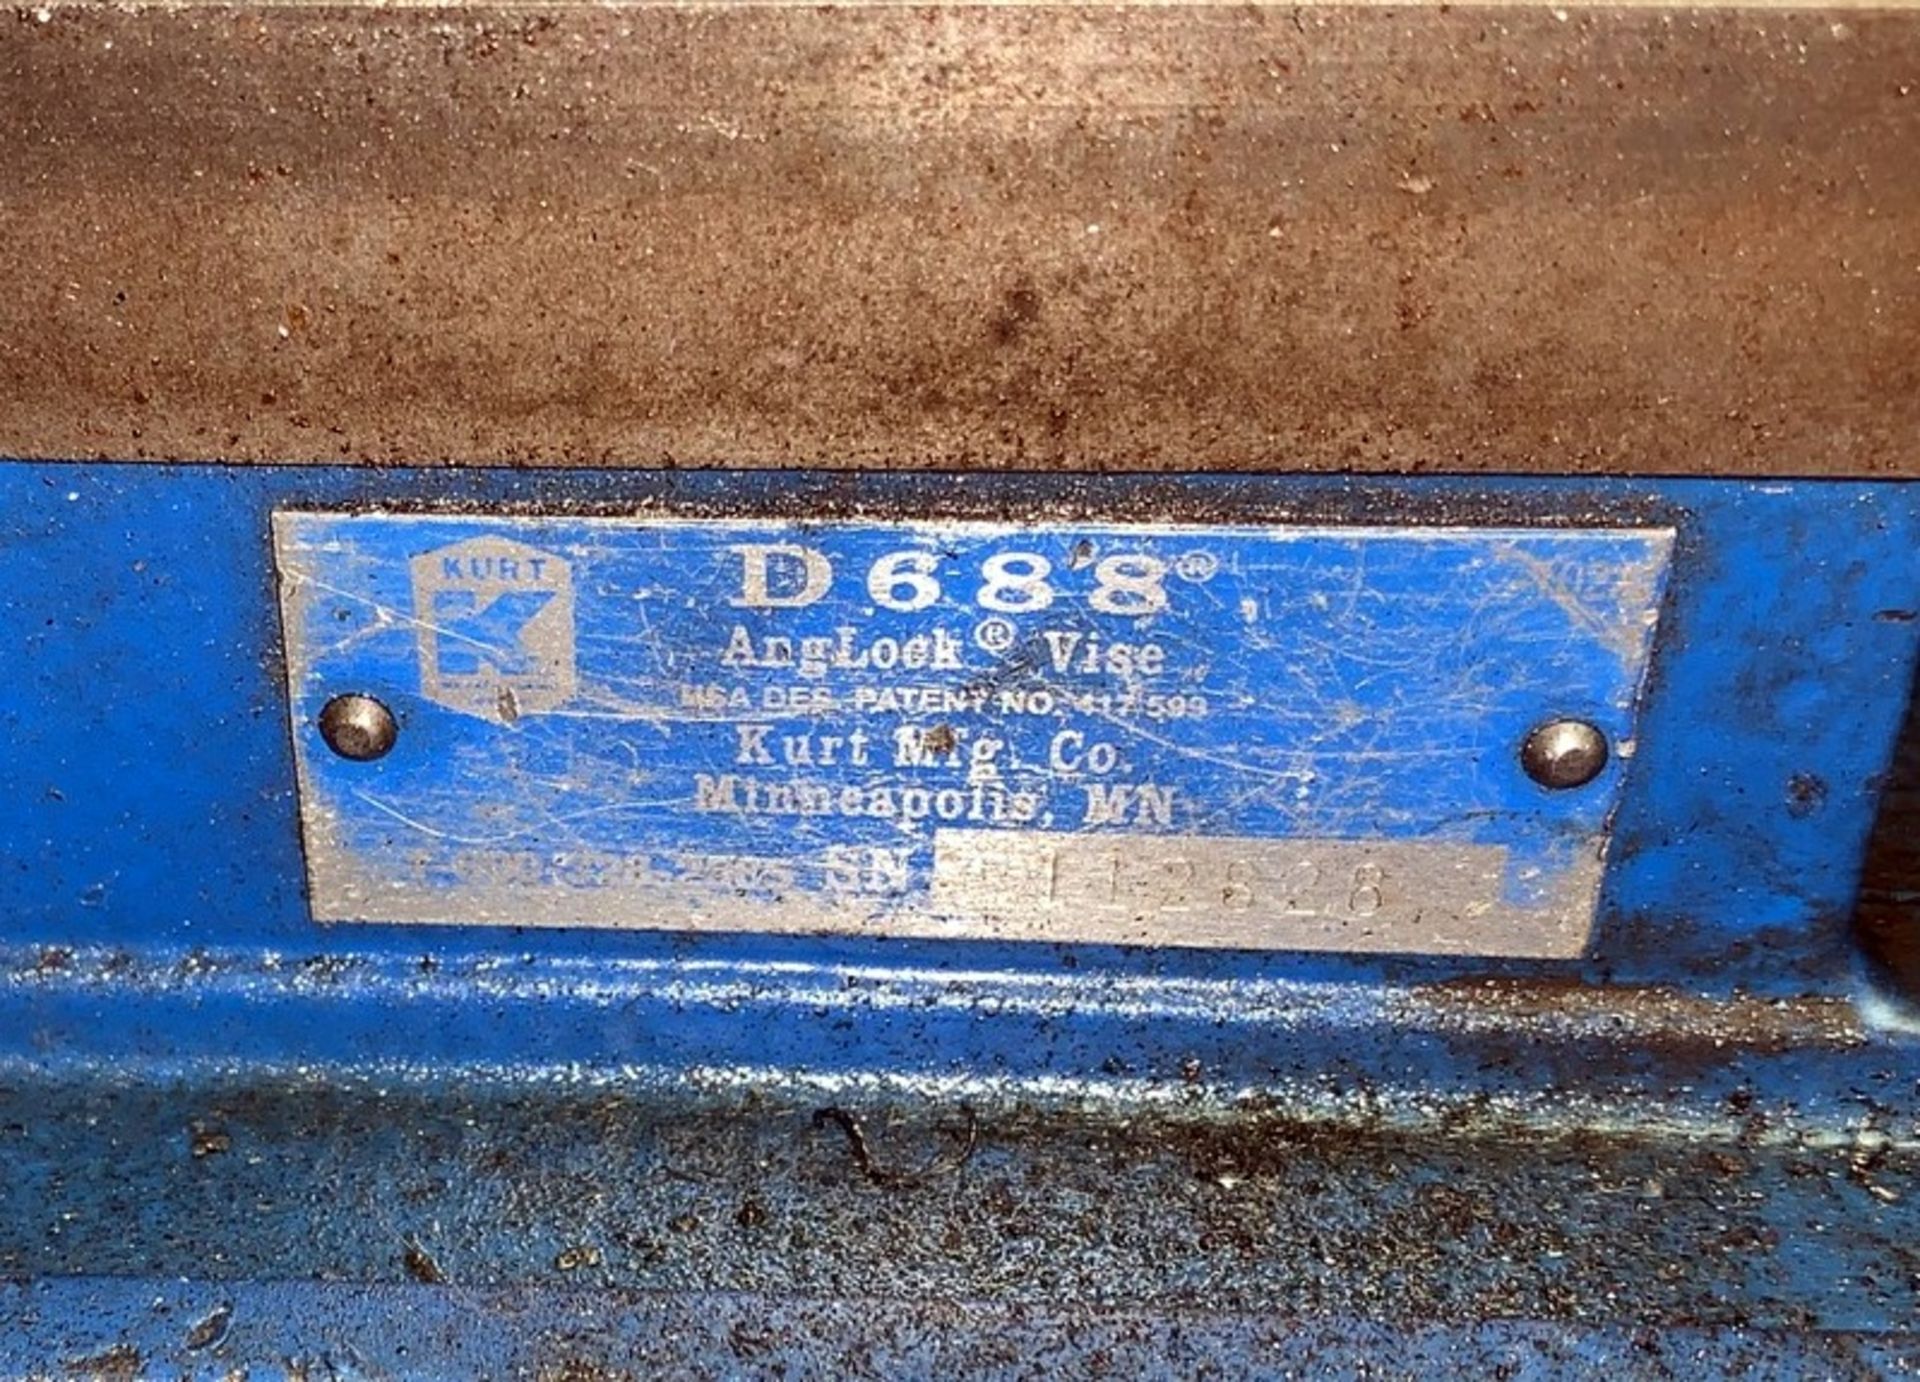 Kurt D688 Milling Machine Vise, 6" Jaws (All Items MUST be Removed by Thursday, December 19, 2019. - Image 3 of 3